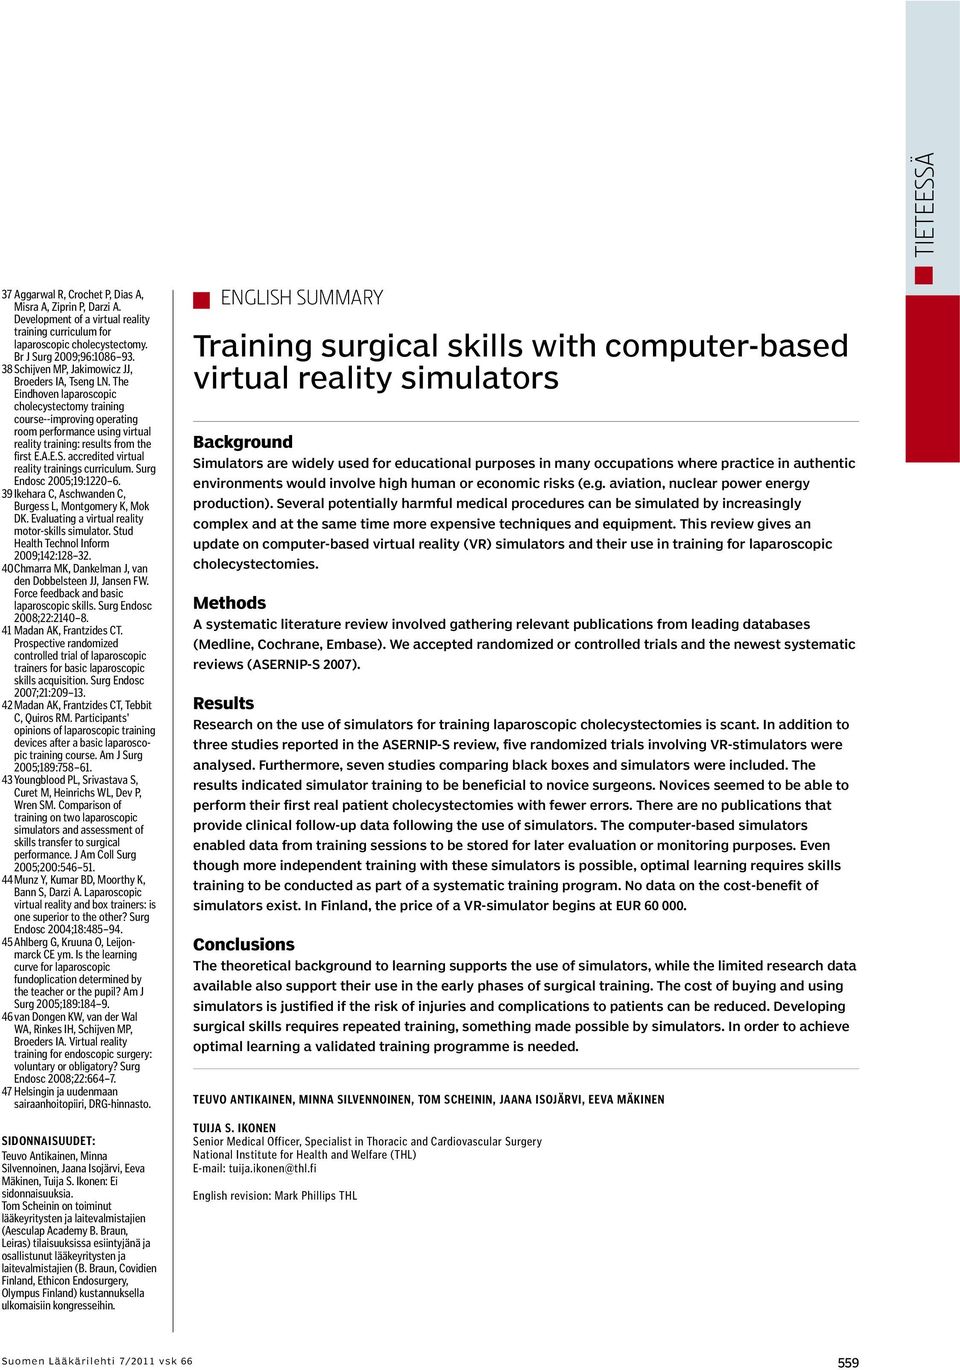 The Eindhoven laparoscopic cholecystectomy training course--improving operating room performance using virtual reality training: results from the first E.A.E.S.